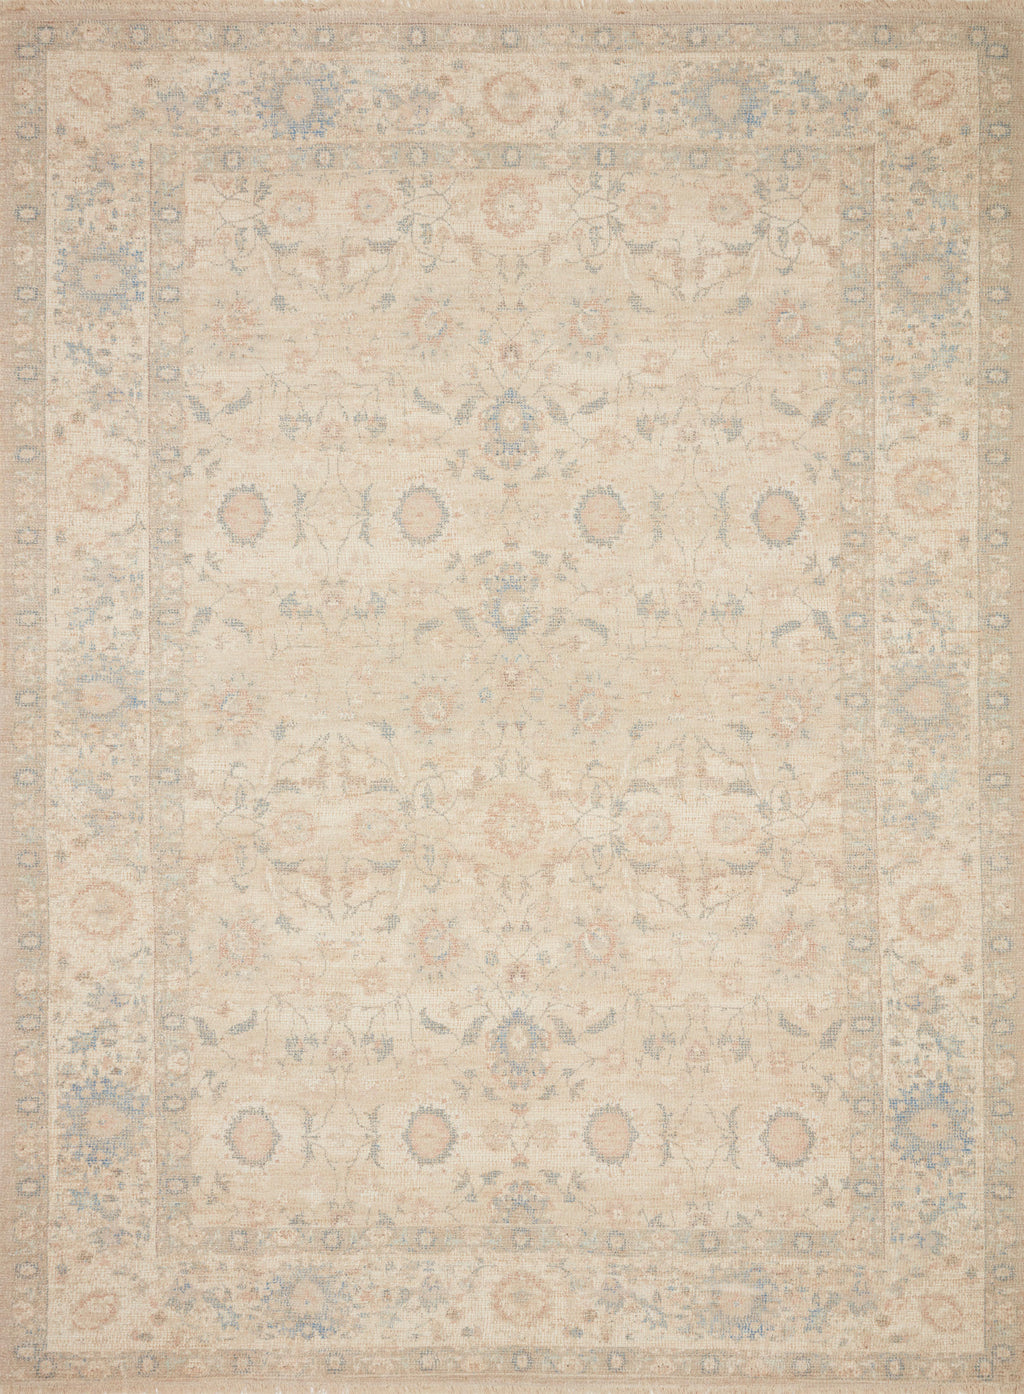 PRIYA Collection Wool/Viscose Rug  in  Natural / Blue Beige Accent Hand-Woven Wool/Viscose